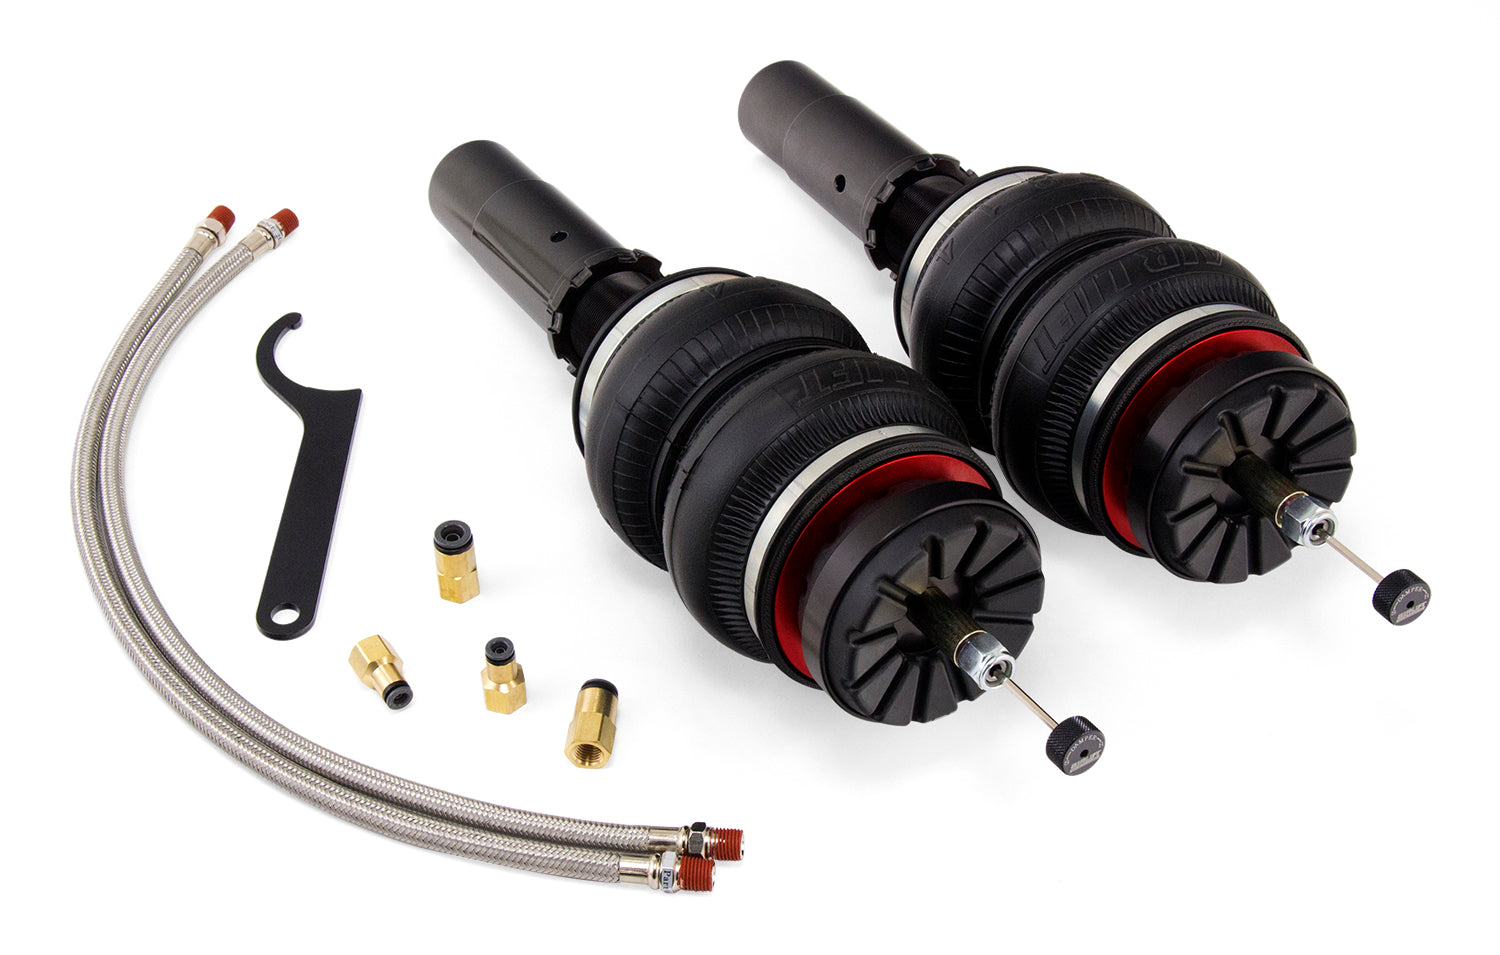 Airride Kit for a 2020 Audi A4 B9 53mm